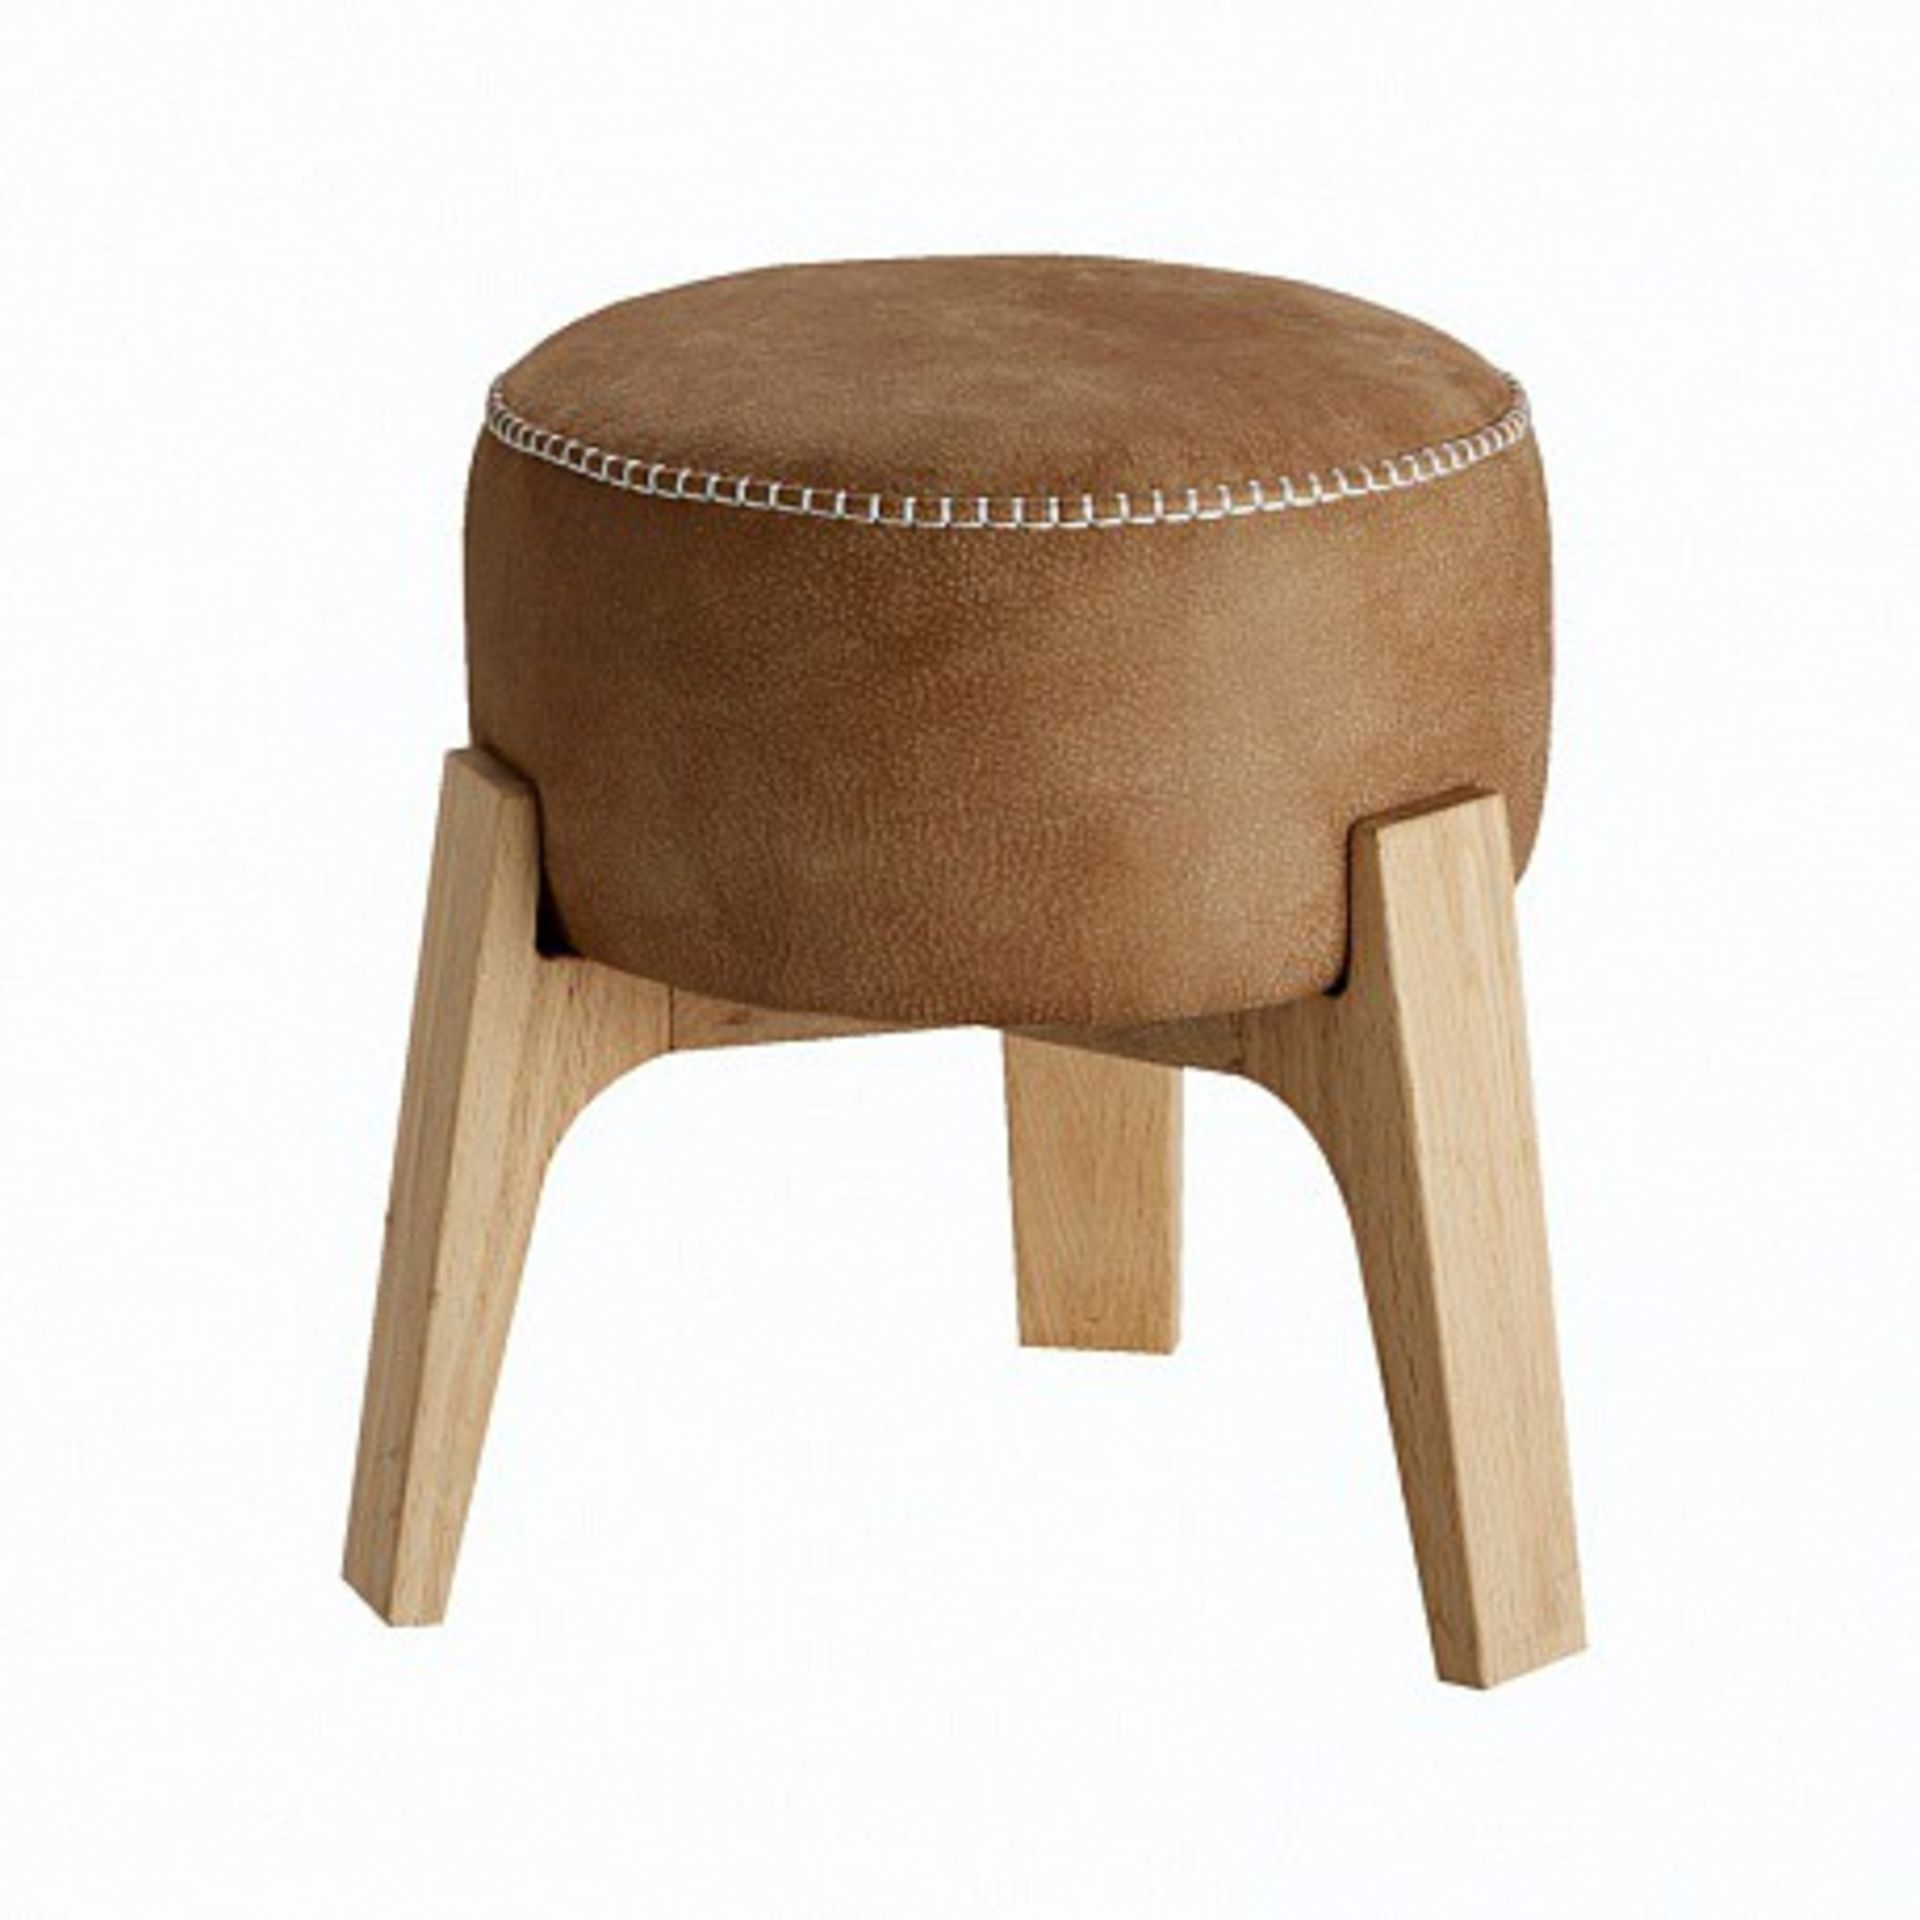 F296 Drum Stool With Reverse Stitching (S) Mohican & Bn.Natural.Oak 6x36x38cm RRP £ 432